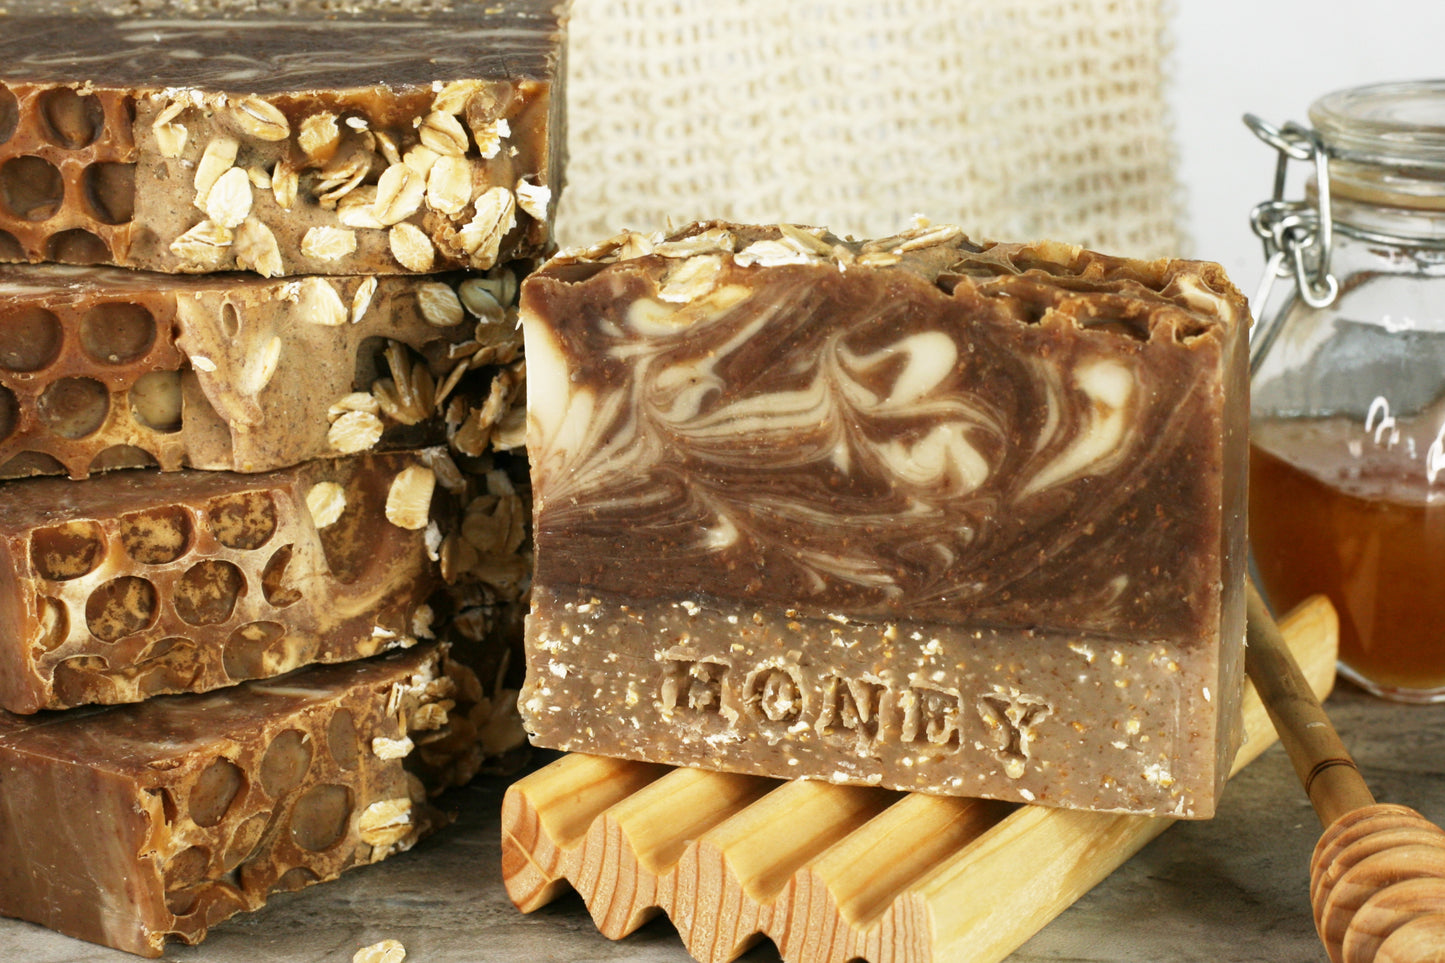 Honey is stamped in a layer of exfoliating oatmeal, with a brown and white swirled layer above this spiced honey scented soap. The top is sprinkled with oats with a textured honeycomb imprint.